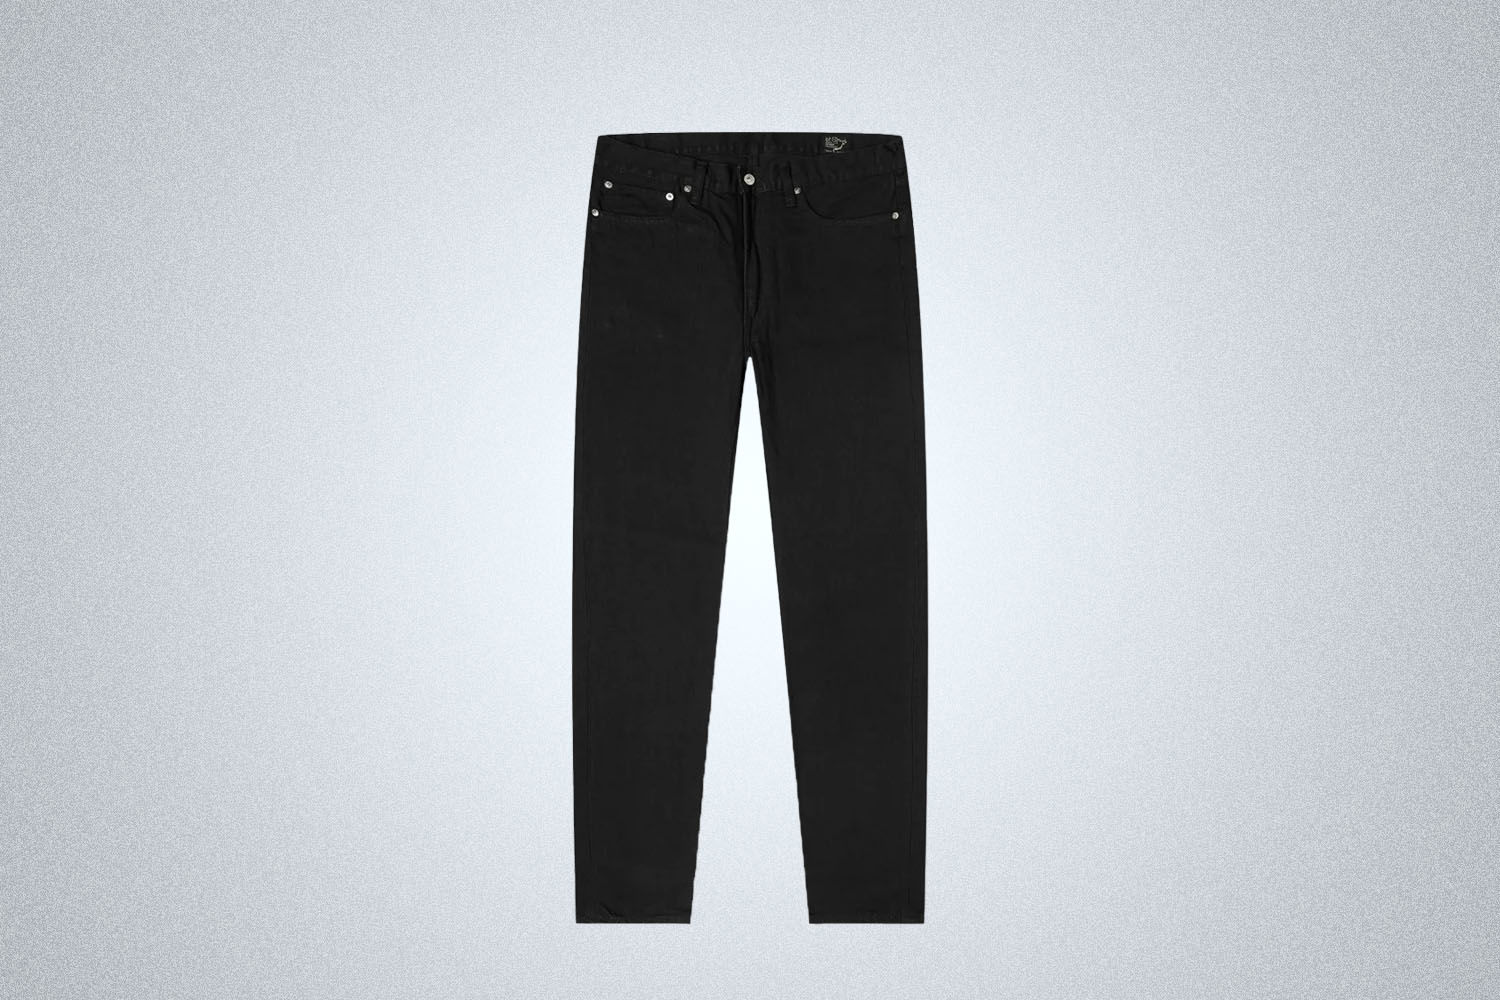 The Orslow 107 Slim Black Jeans on a gray background